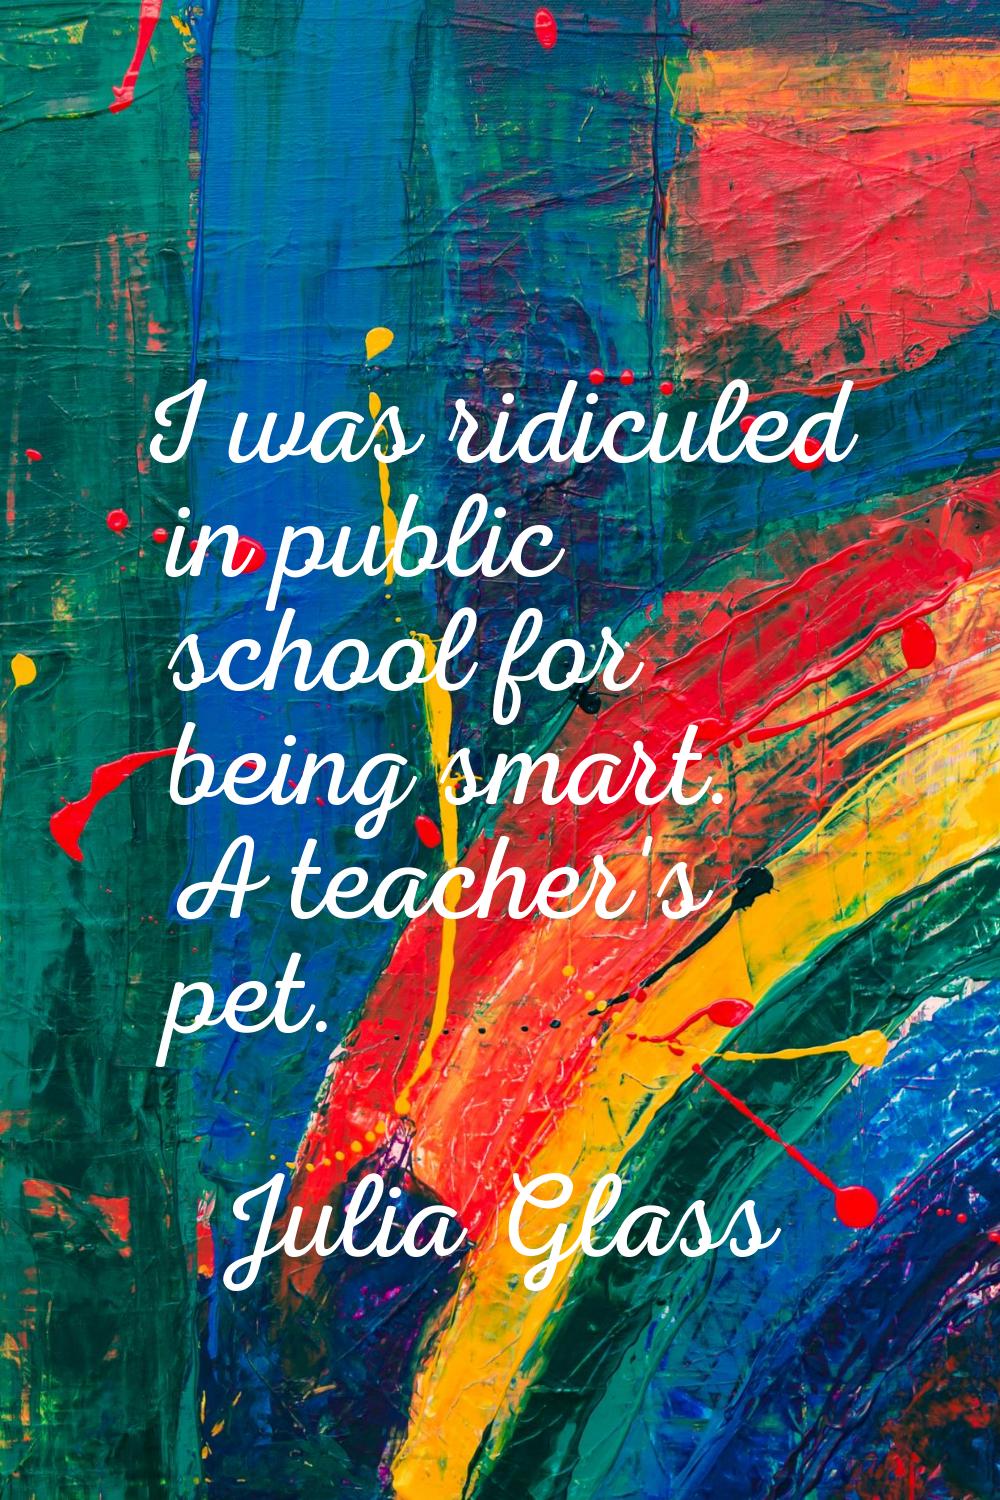 I was ridiculed in public school for being smart. A teacher's pet.